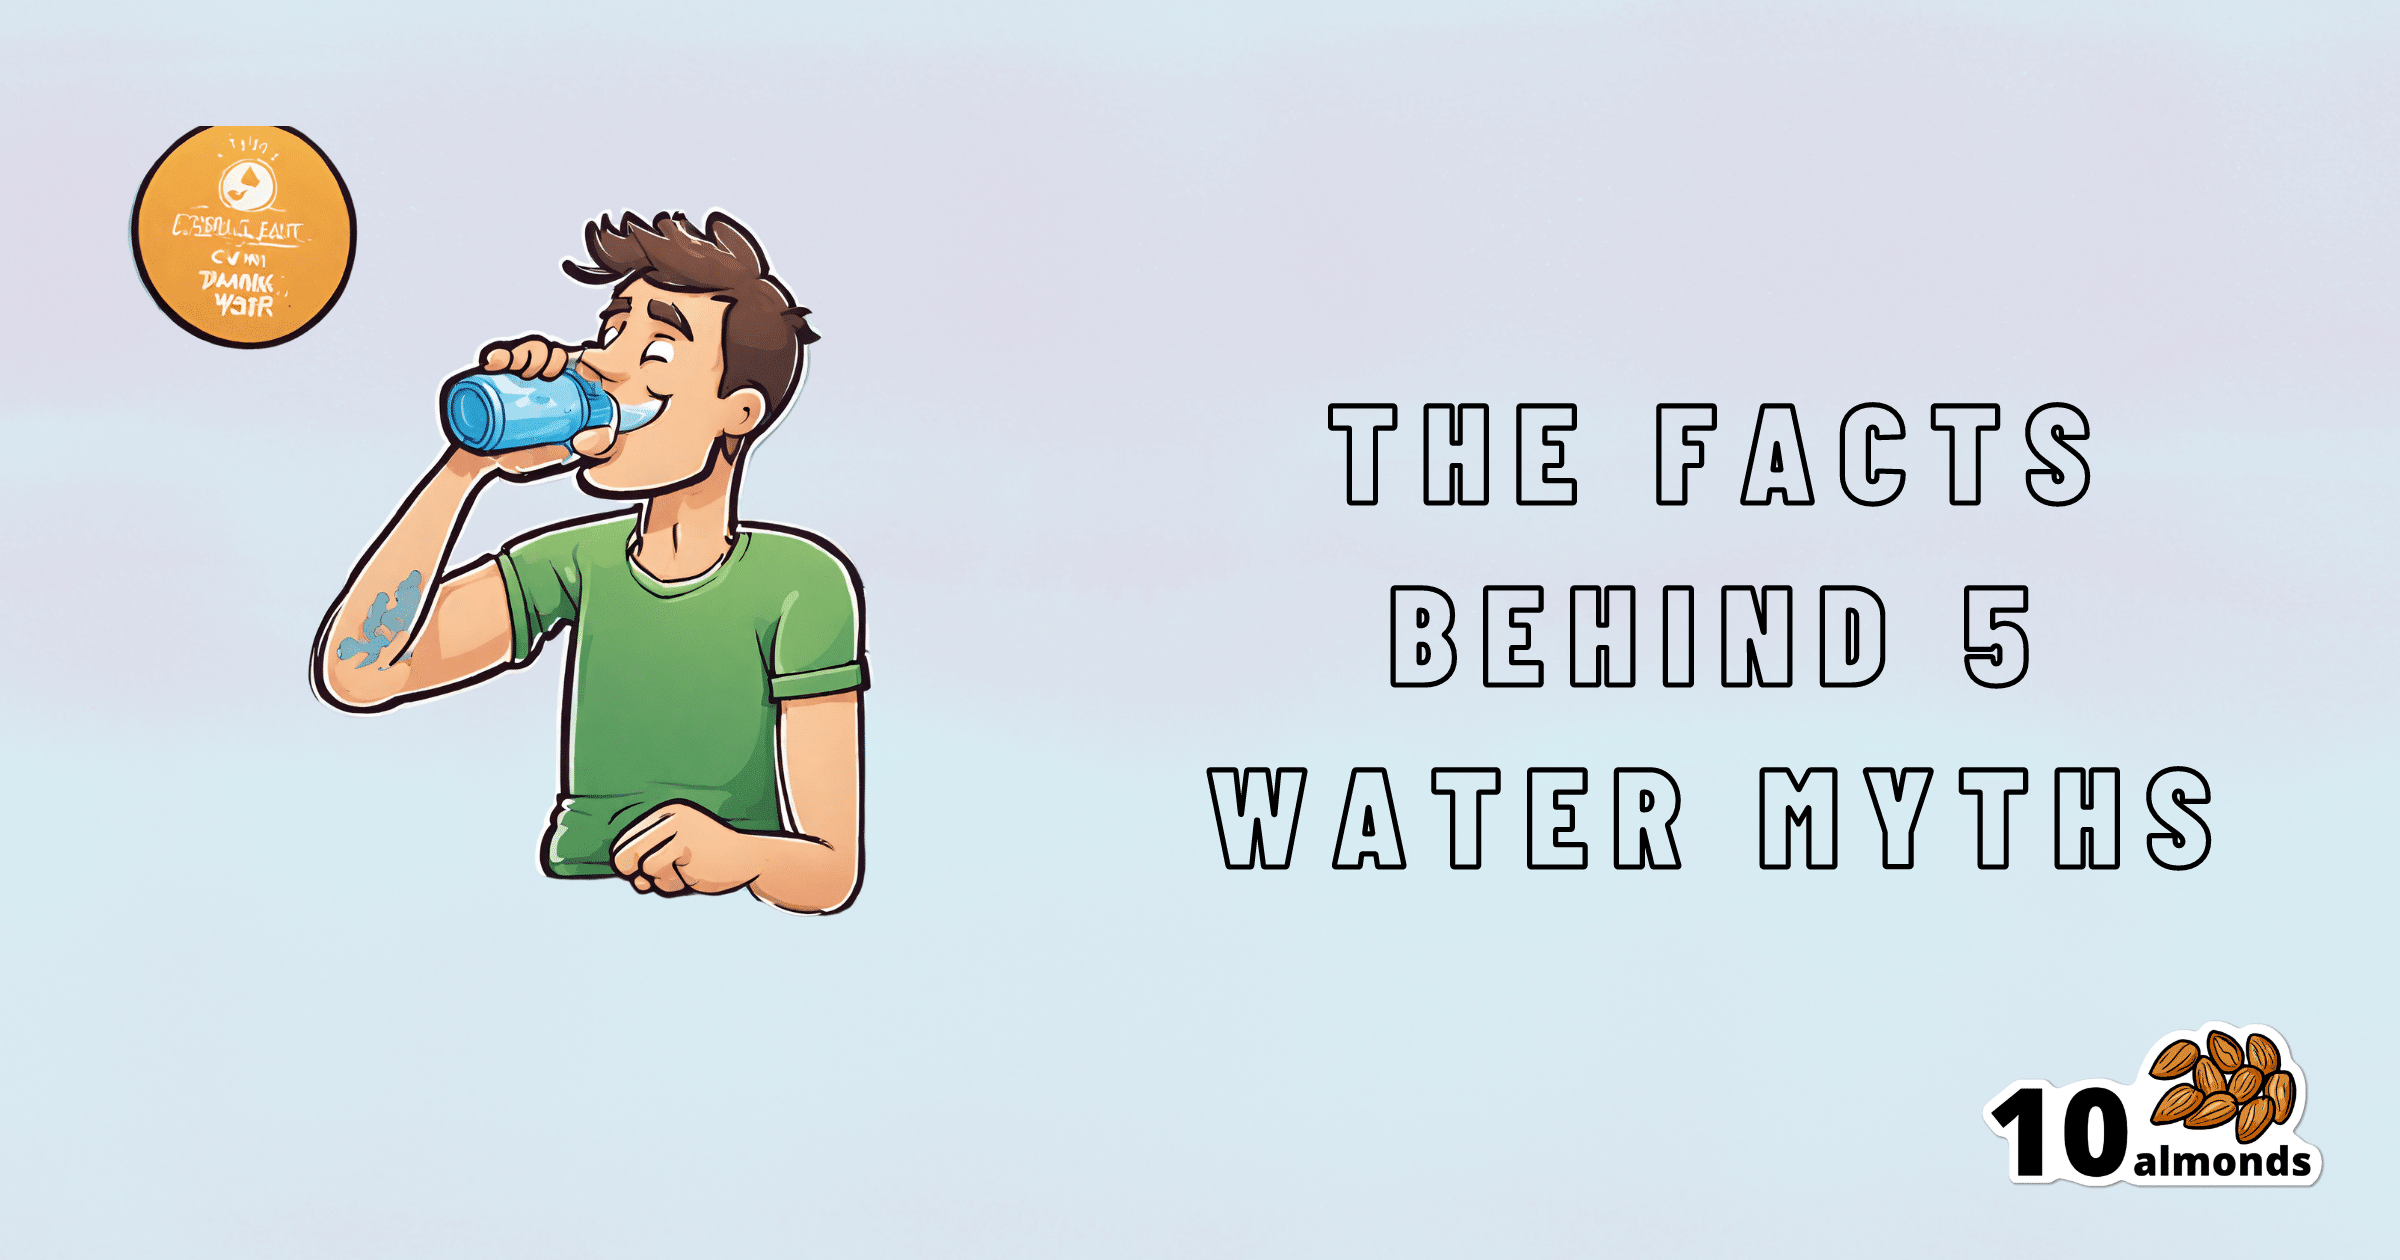 Debunking water myths - the truth about cold water.